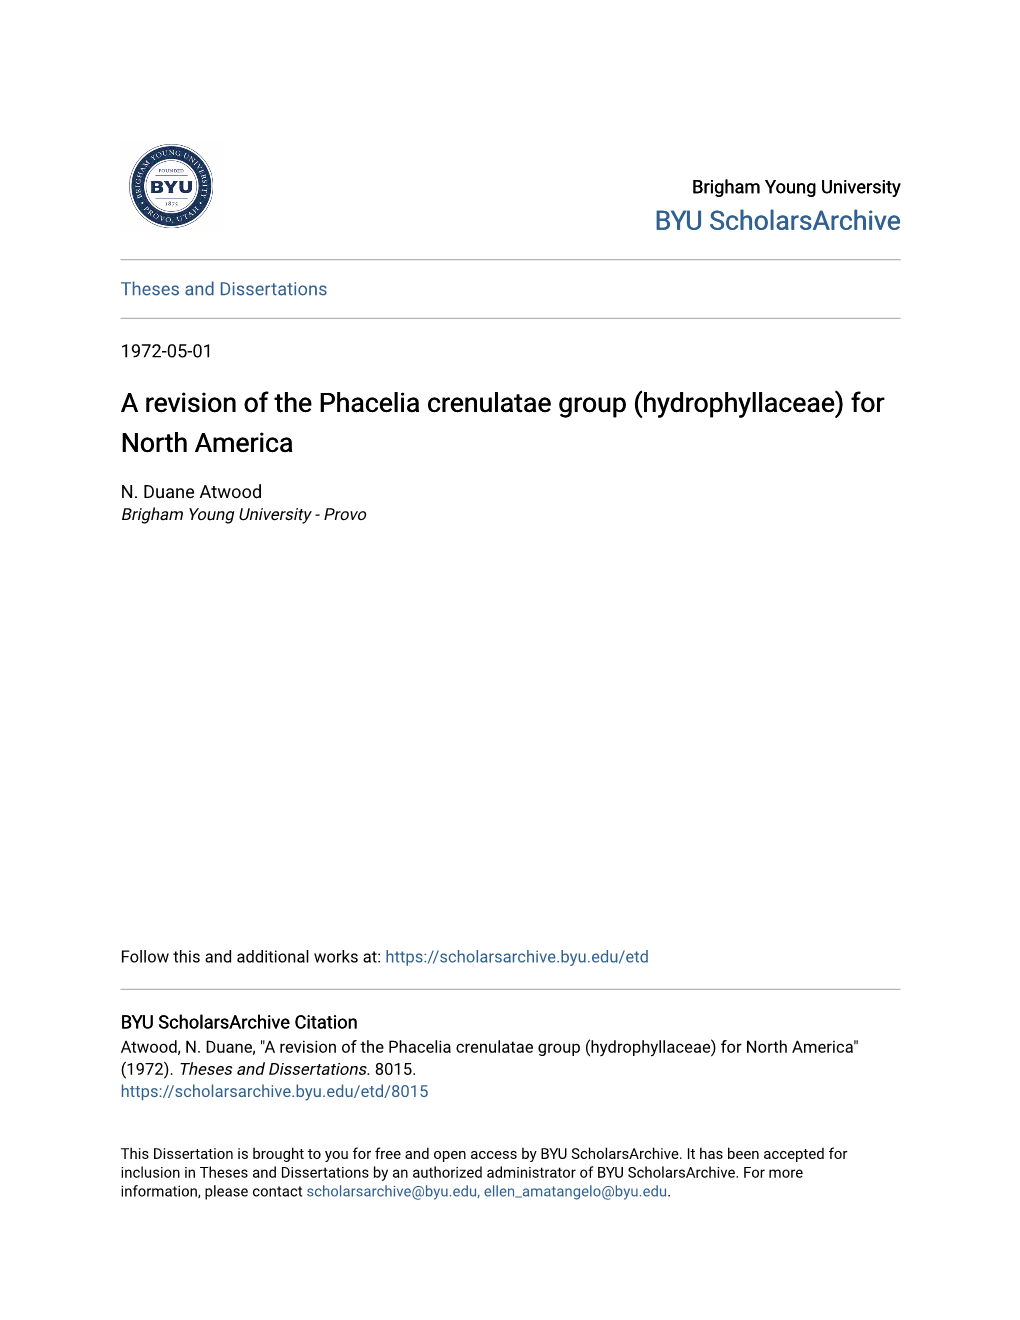 A Revision of the Phacelia Crenulatae Group (Hydrophyllaceae) for North America